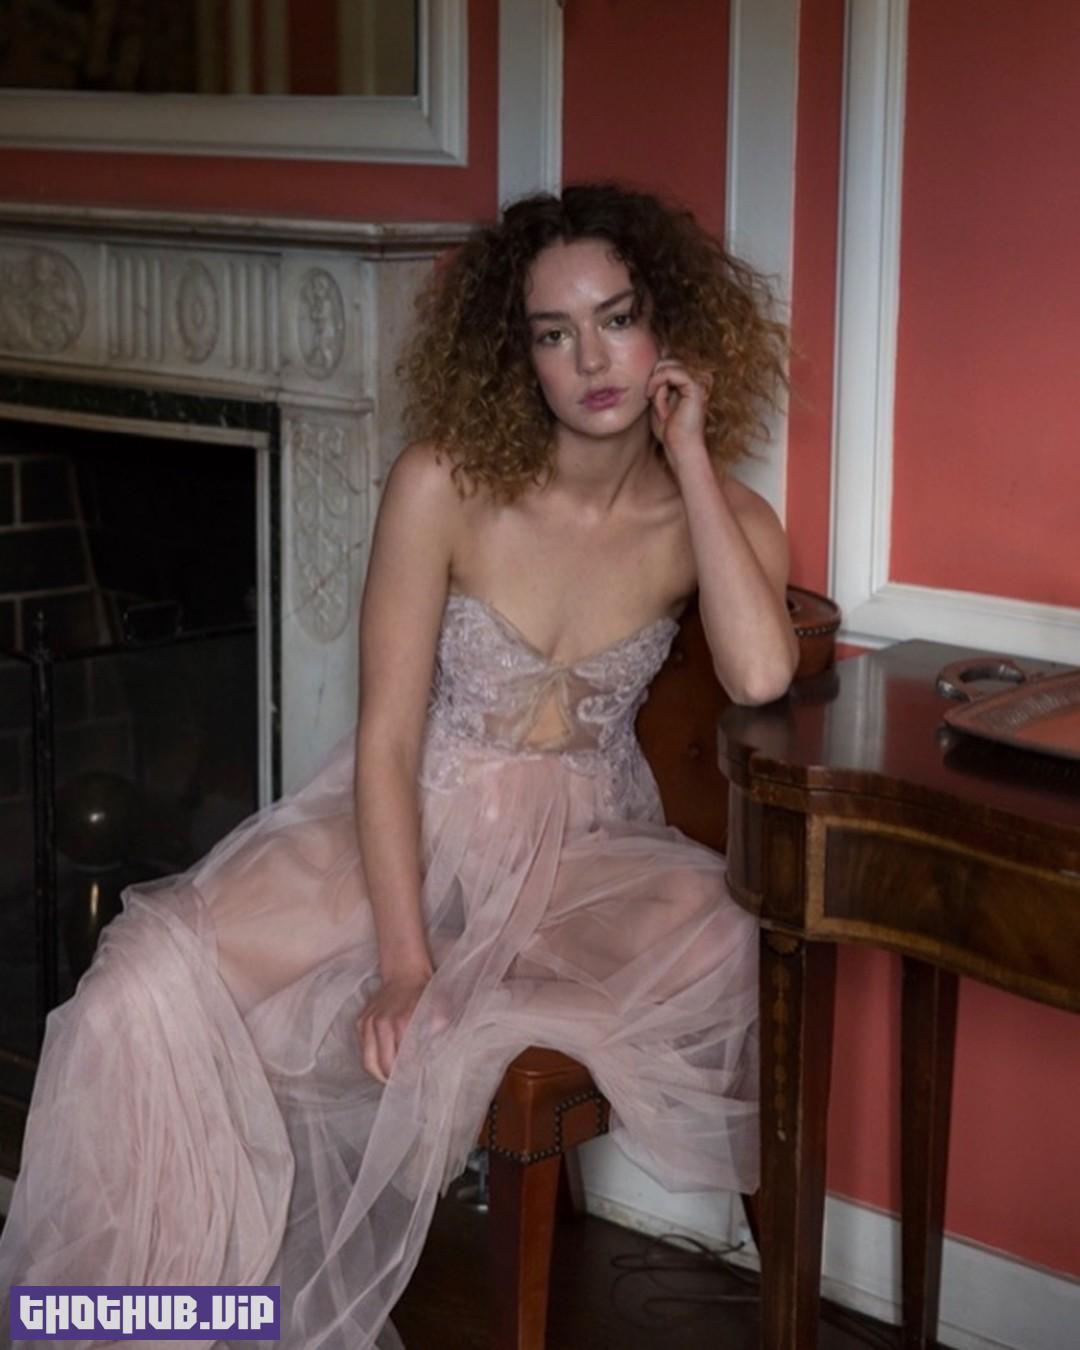 1683834398 869 Brigette Lundy Paine TheFappening Sexy Photos